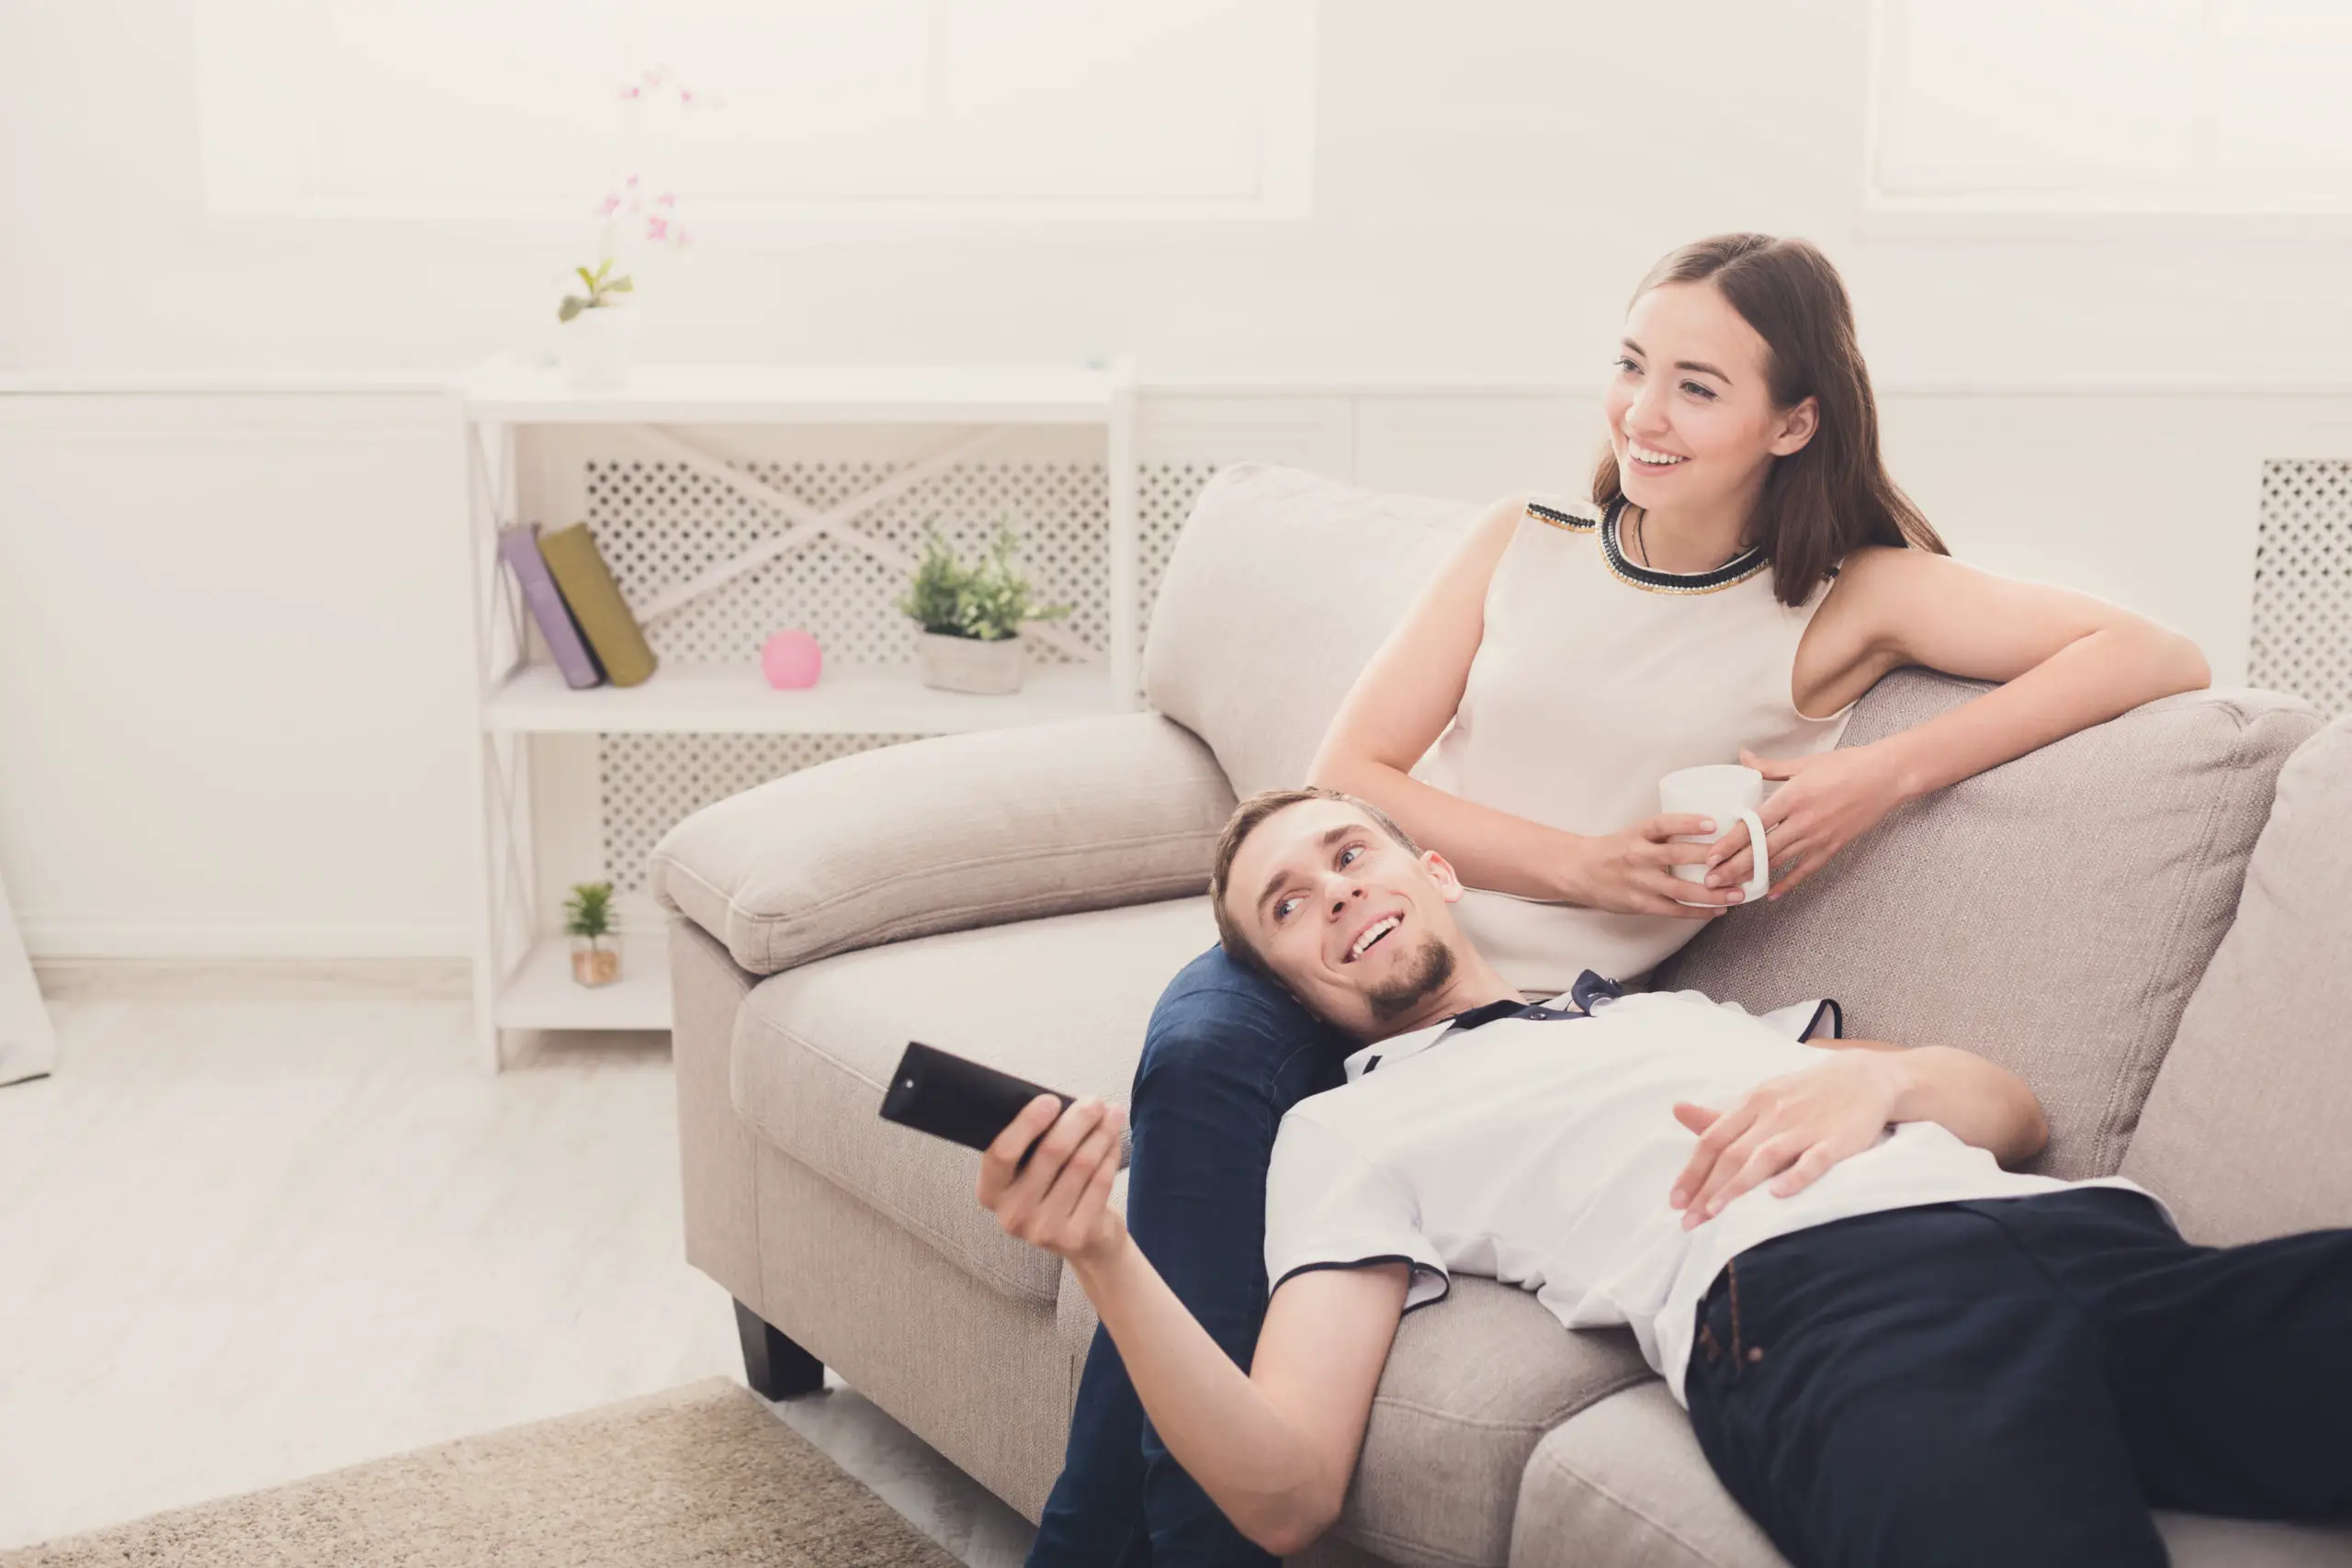 https://elements.envato.com/smiling-young-couple-watching-tv-at-home-PKXLYAS